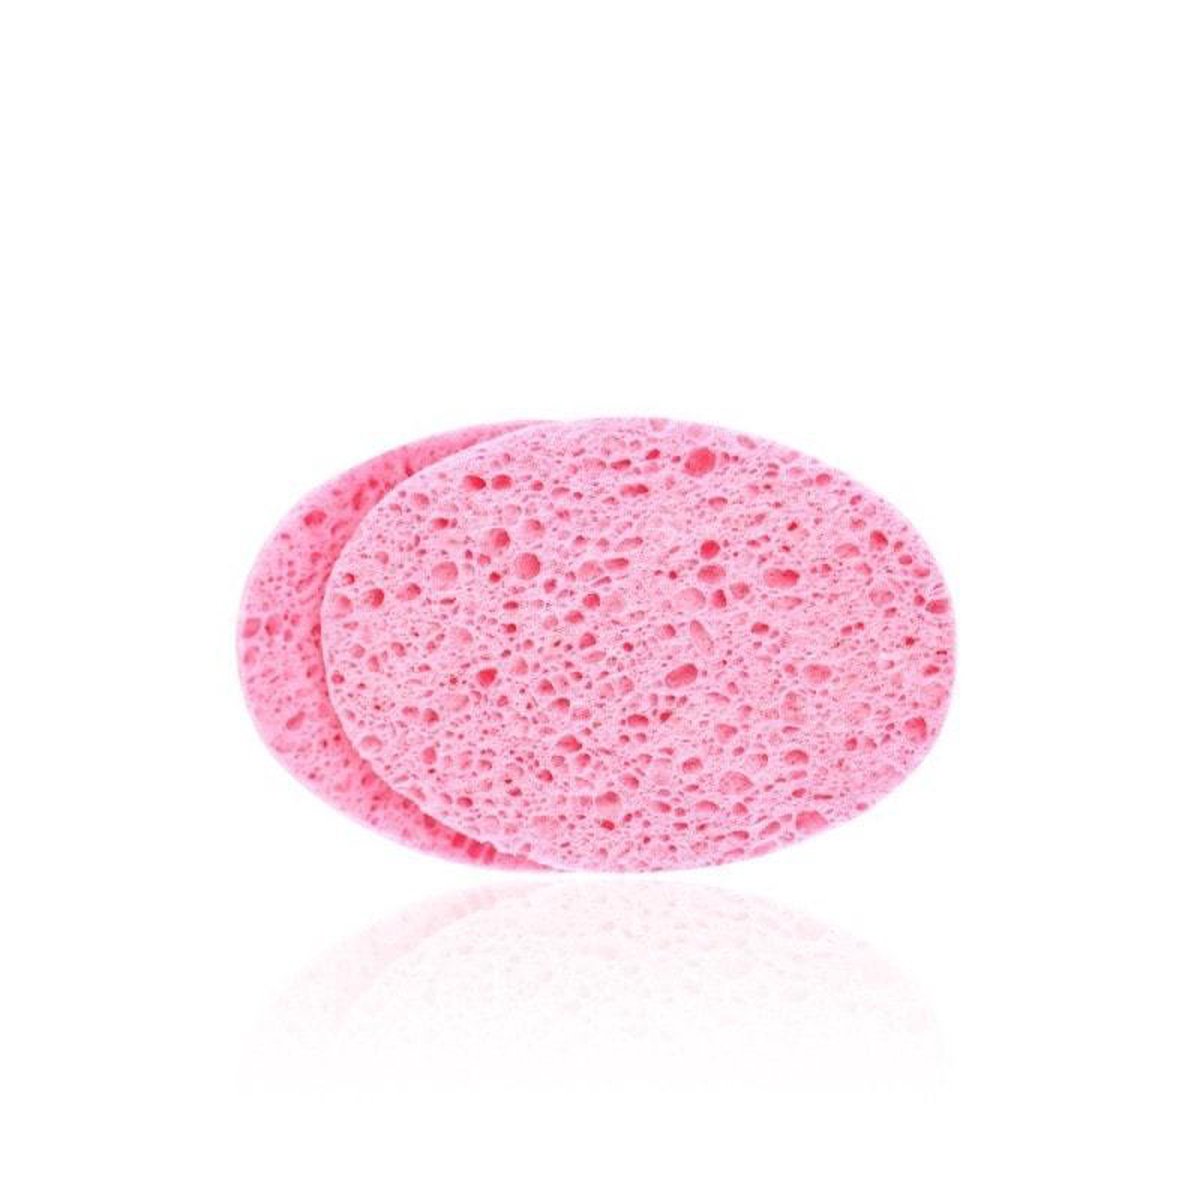 Donegal Cellulose Sponge - Cosmetische Spons 2st. - 9617